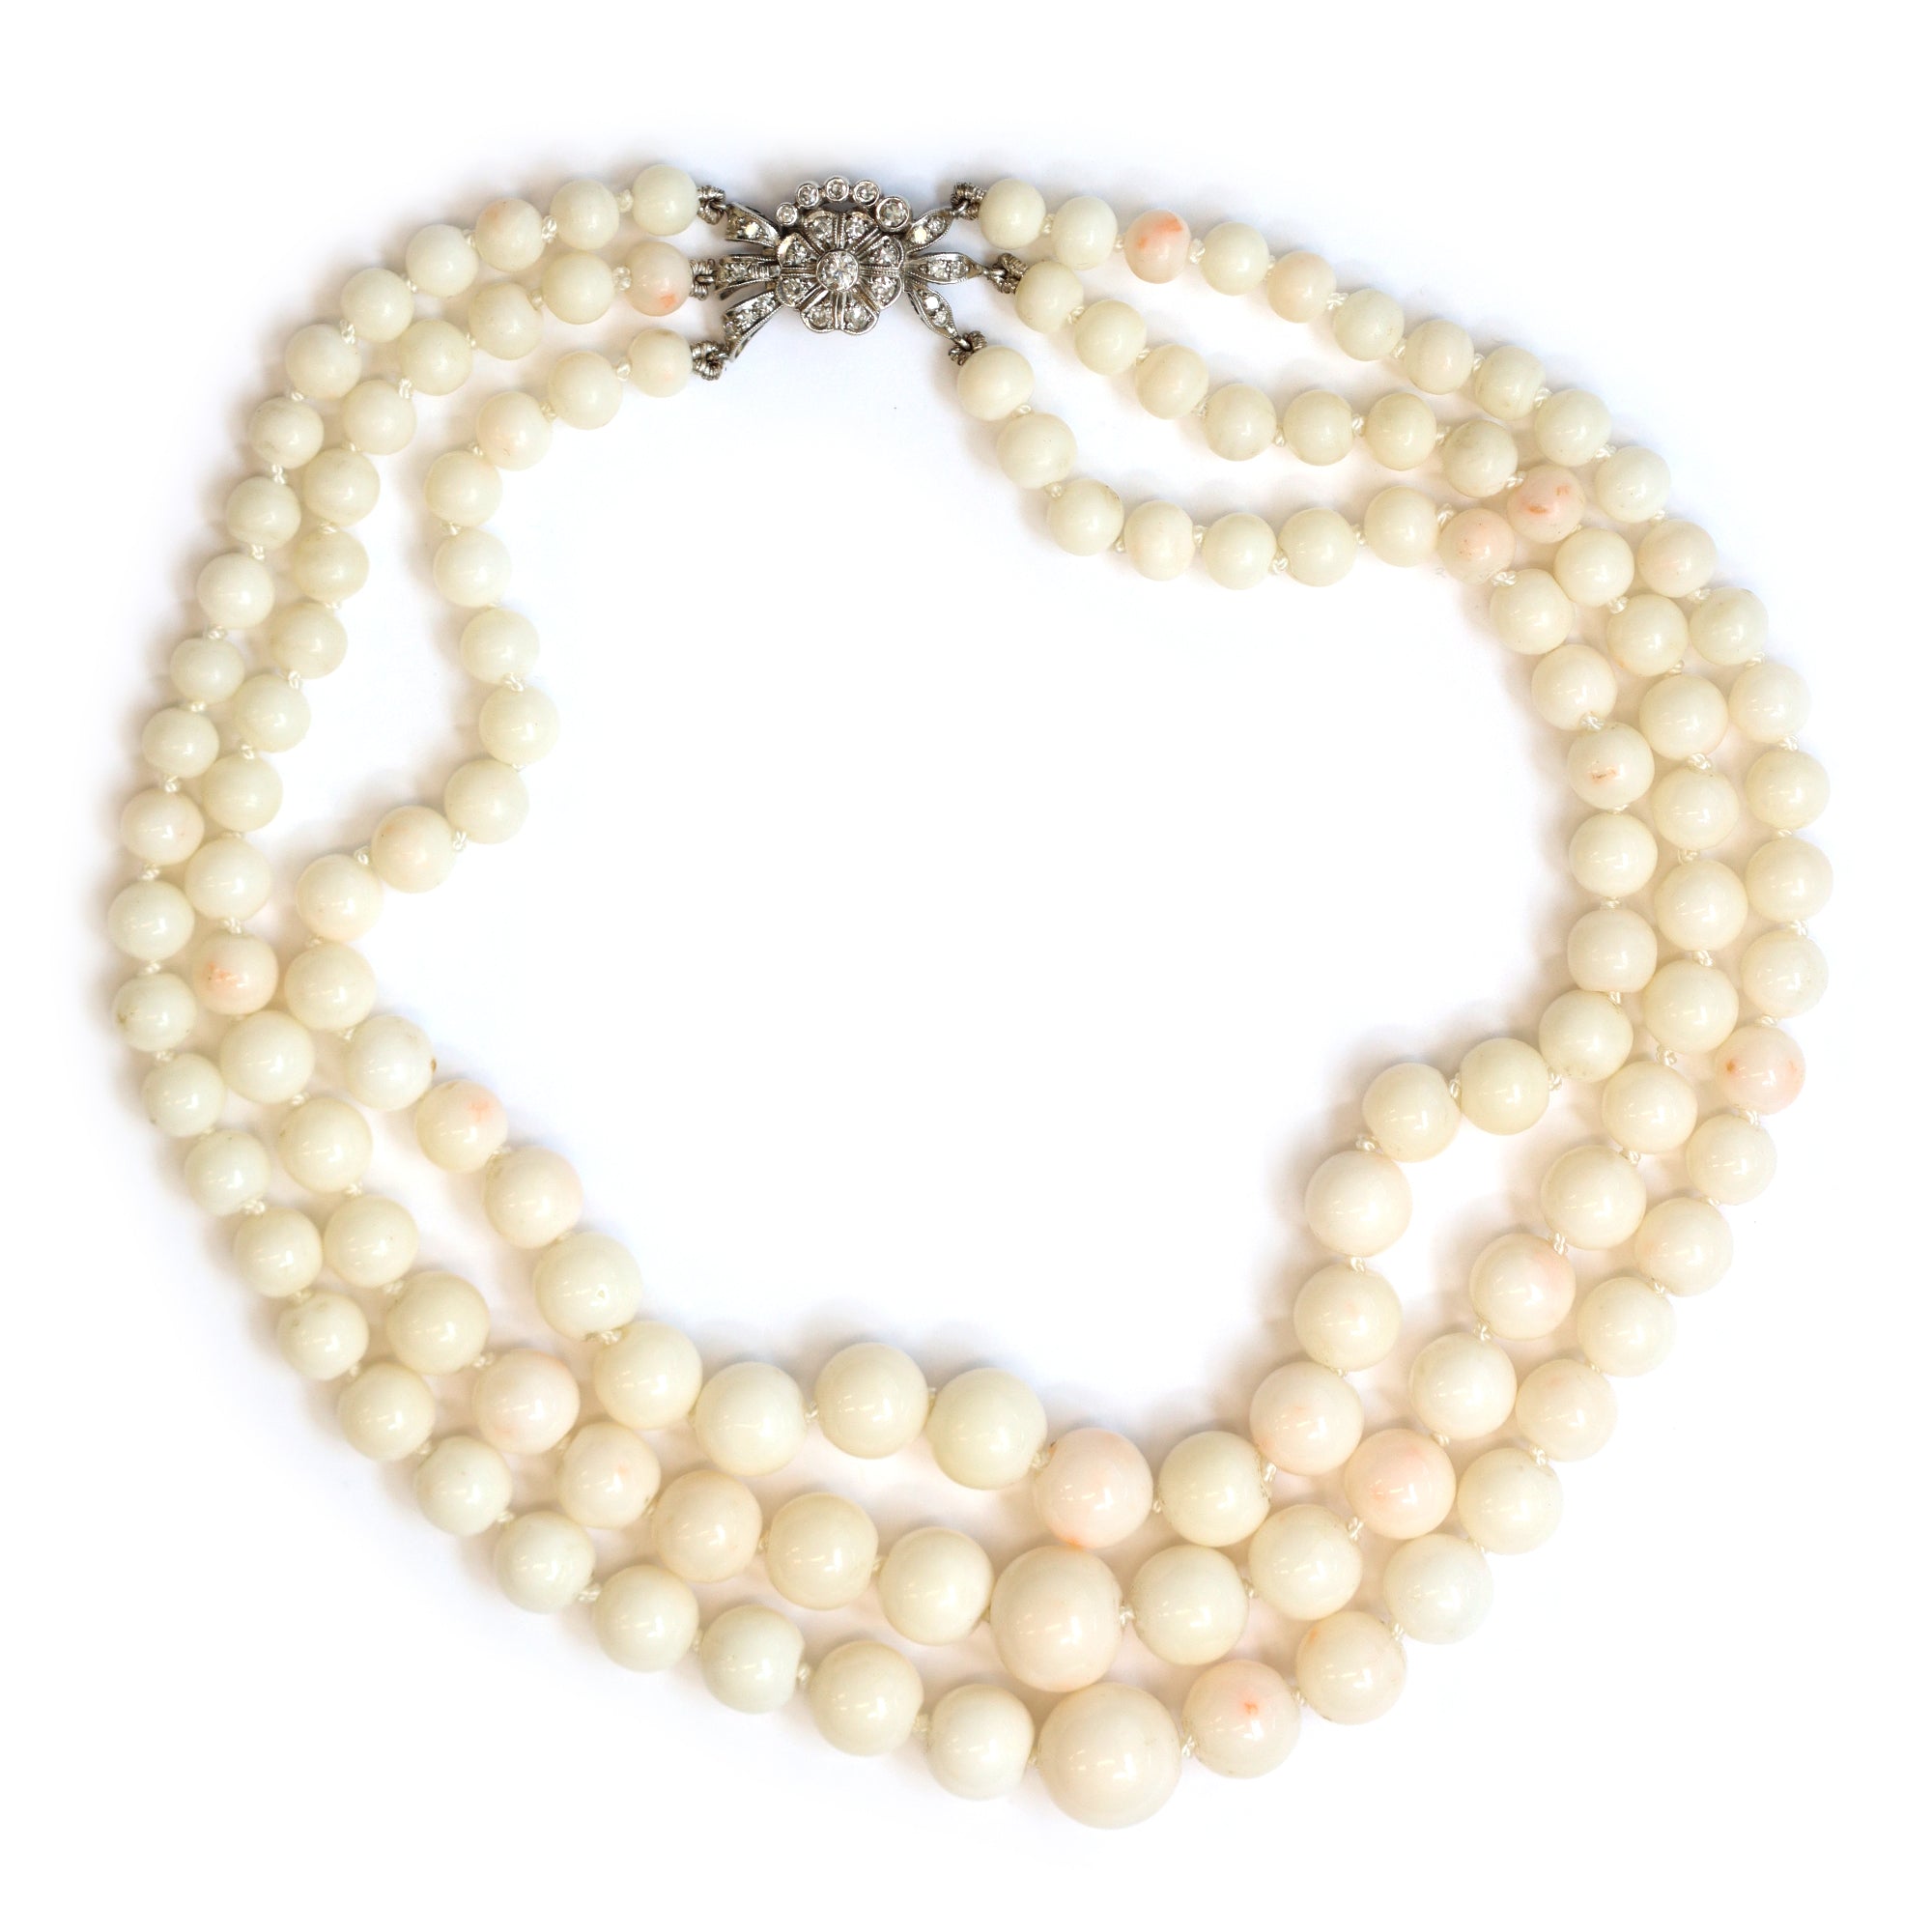 Vintage Triple Strand of White Coral Necklace with Platinum Diamond Clasp